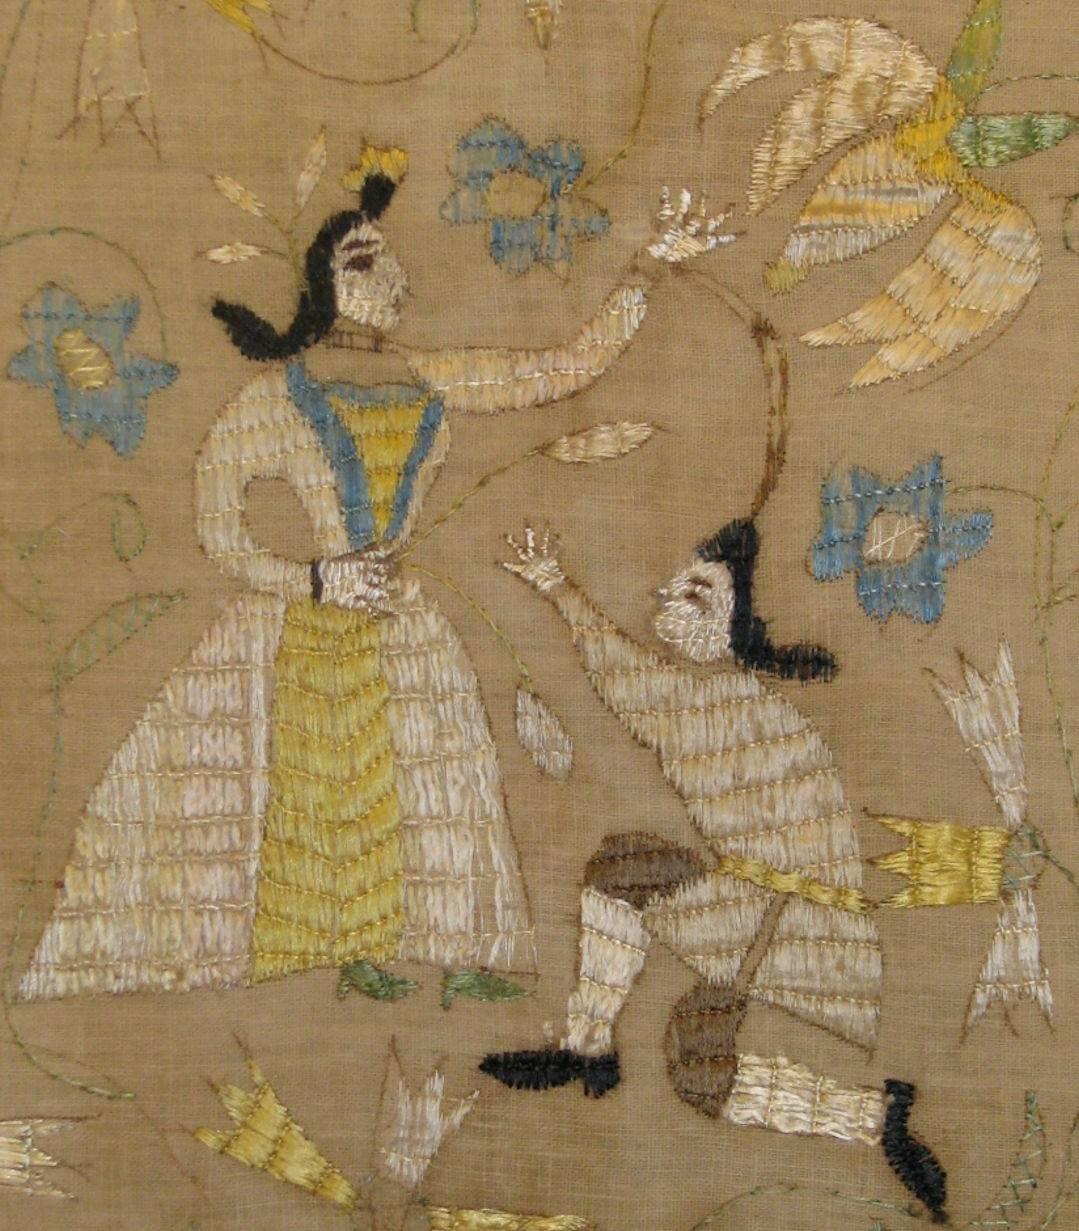 A 19th century Portuguese (Castelo Branco) embroidered coverlet made of homespun linen/flax and embroidered in silk floss thread with a central roundel with a boy and girl surrounded by blossoming flowers, scrolling vines, and birds.